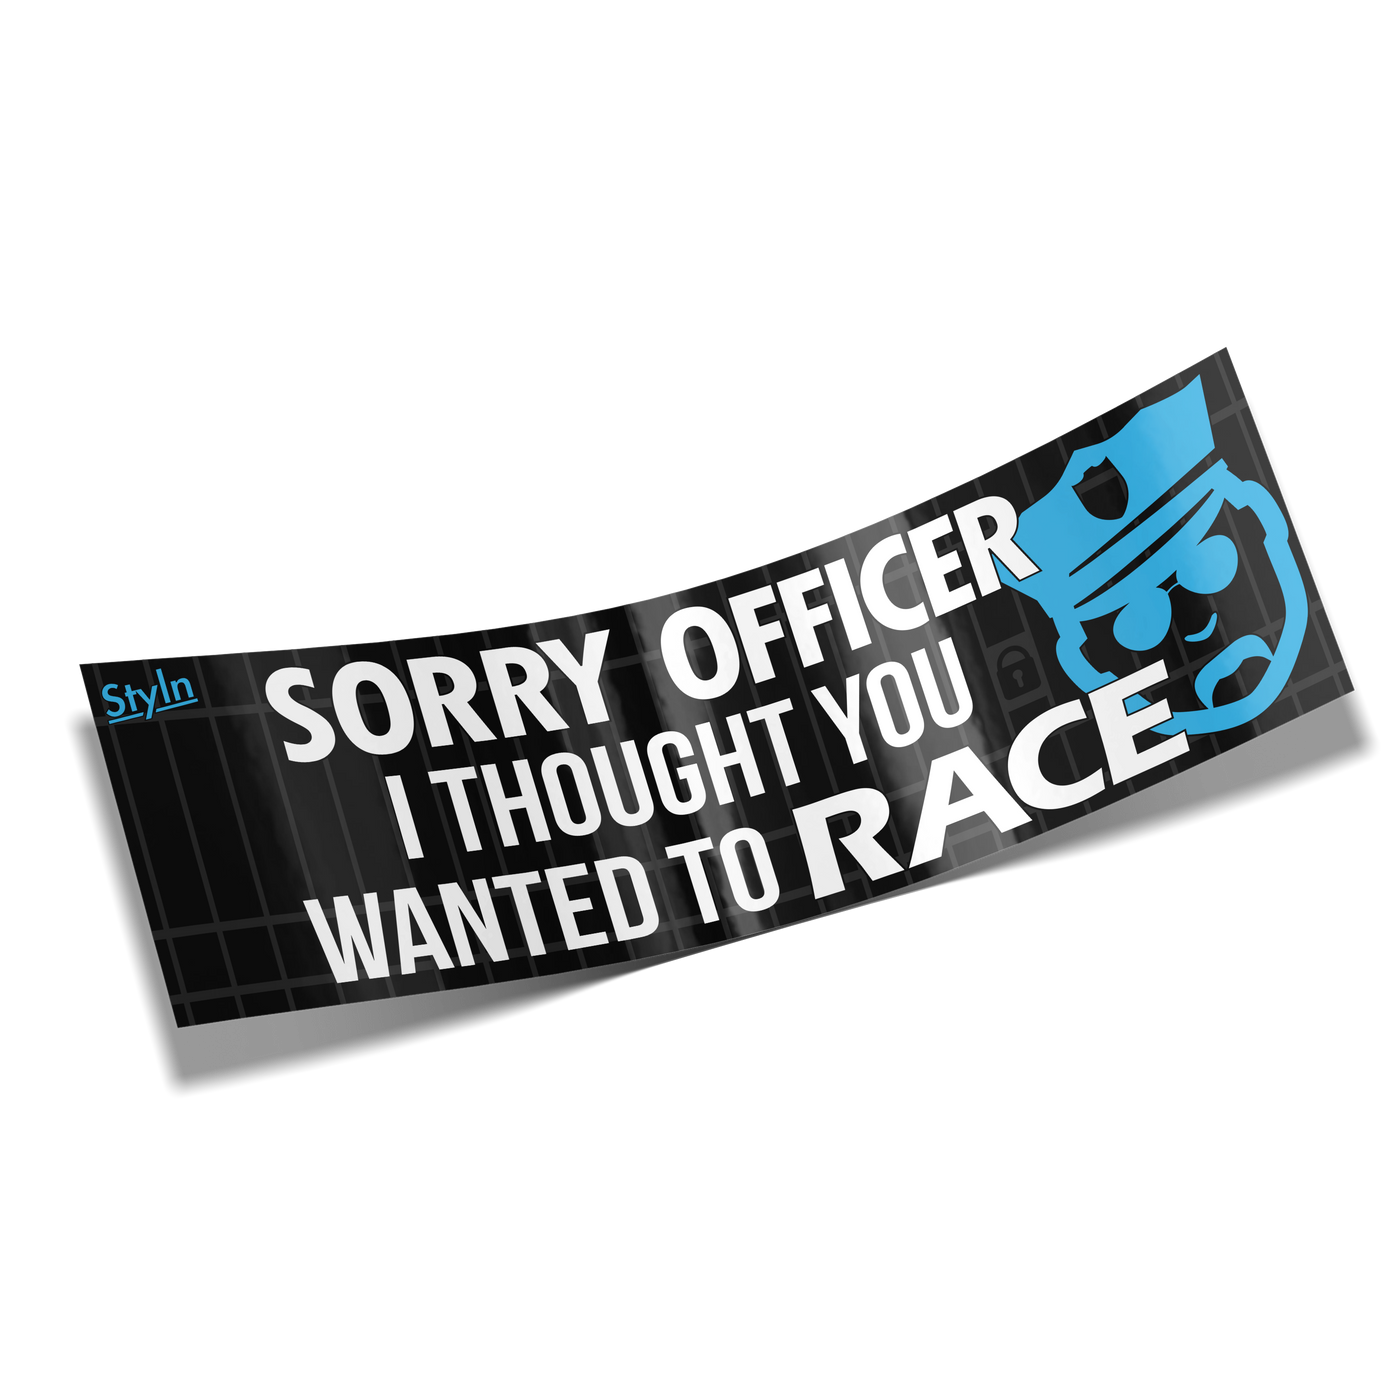 SLAP SORRY OFFICER WANTED TO RACE